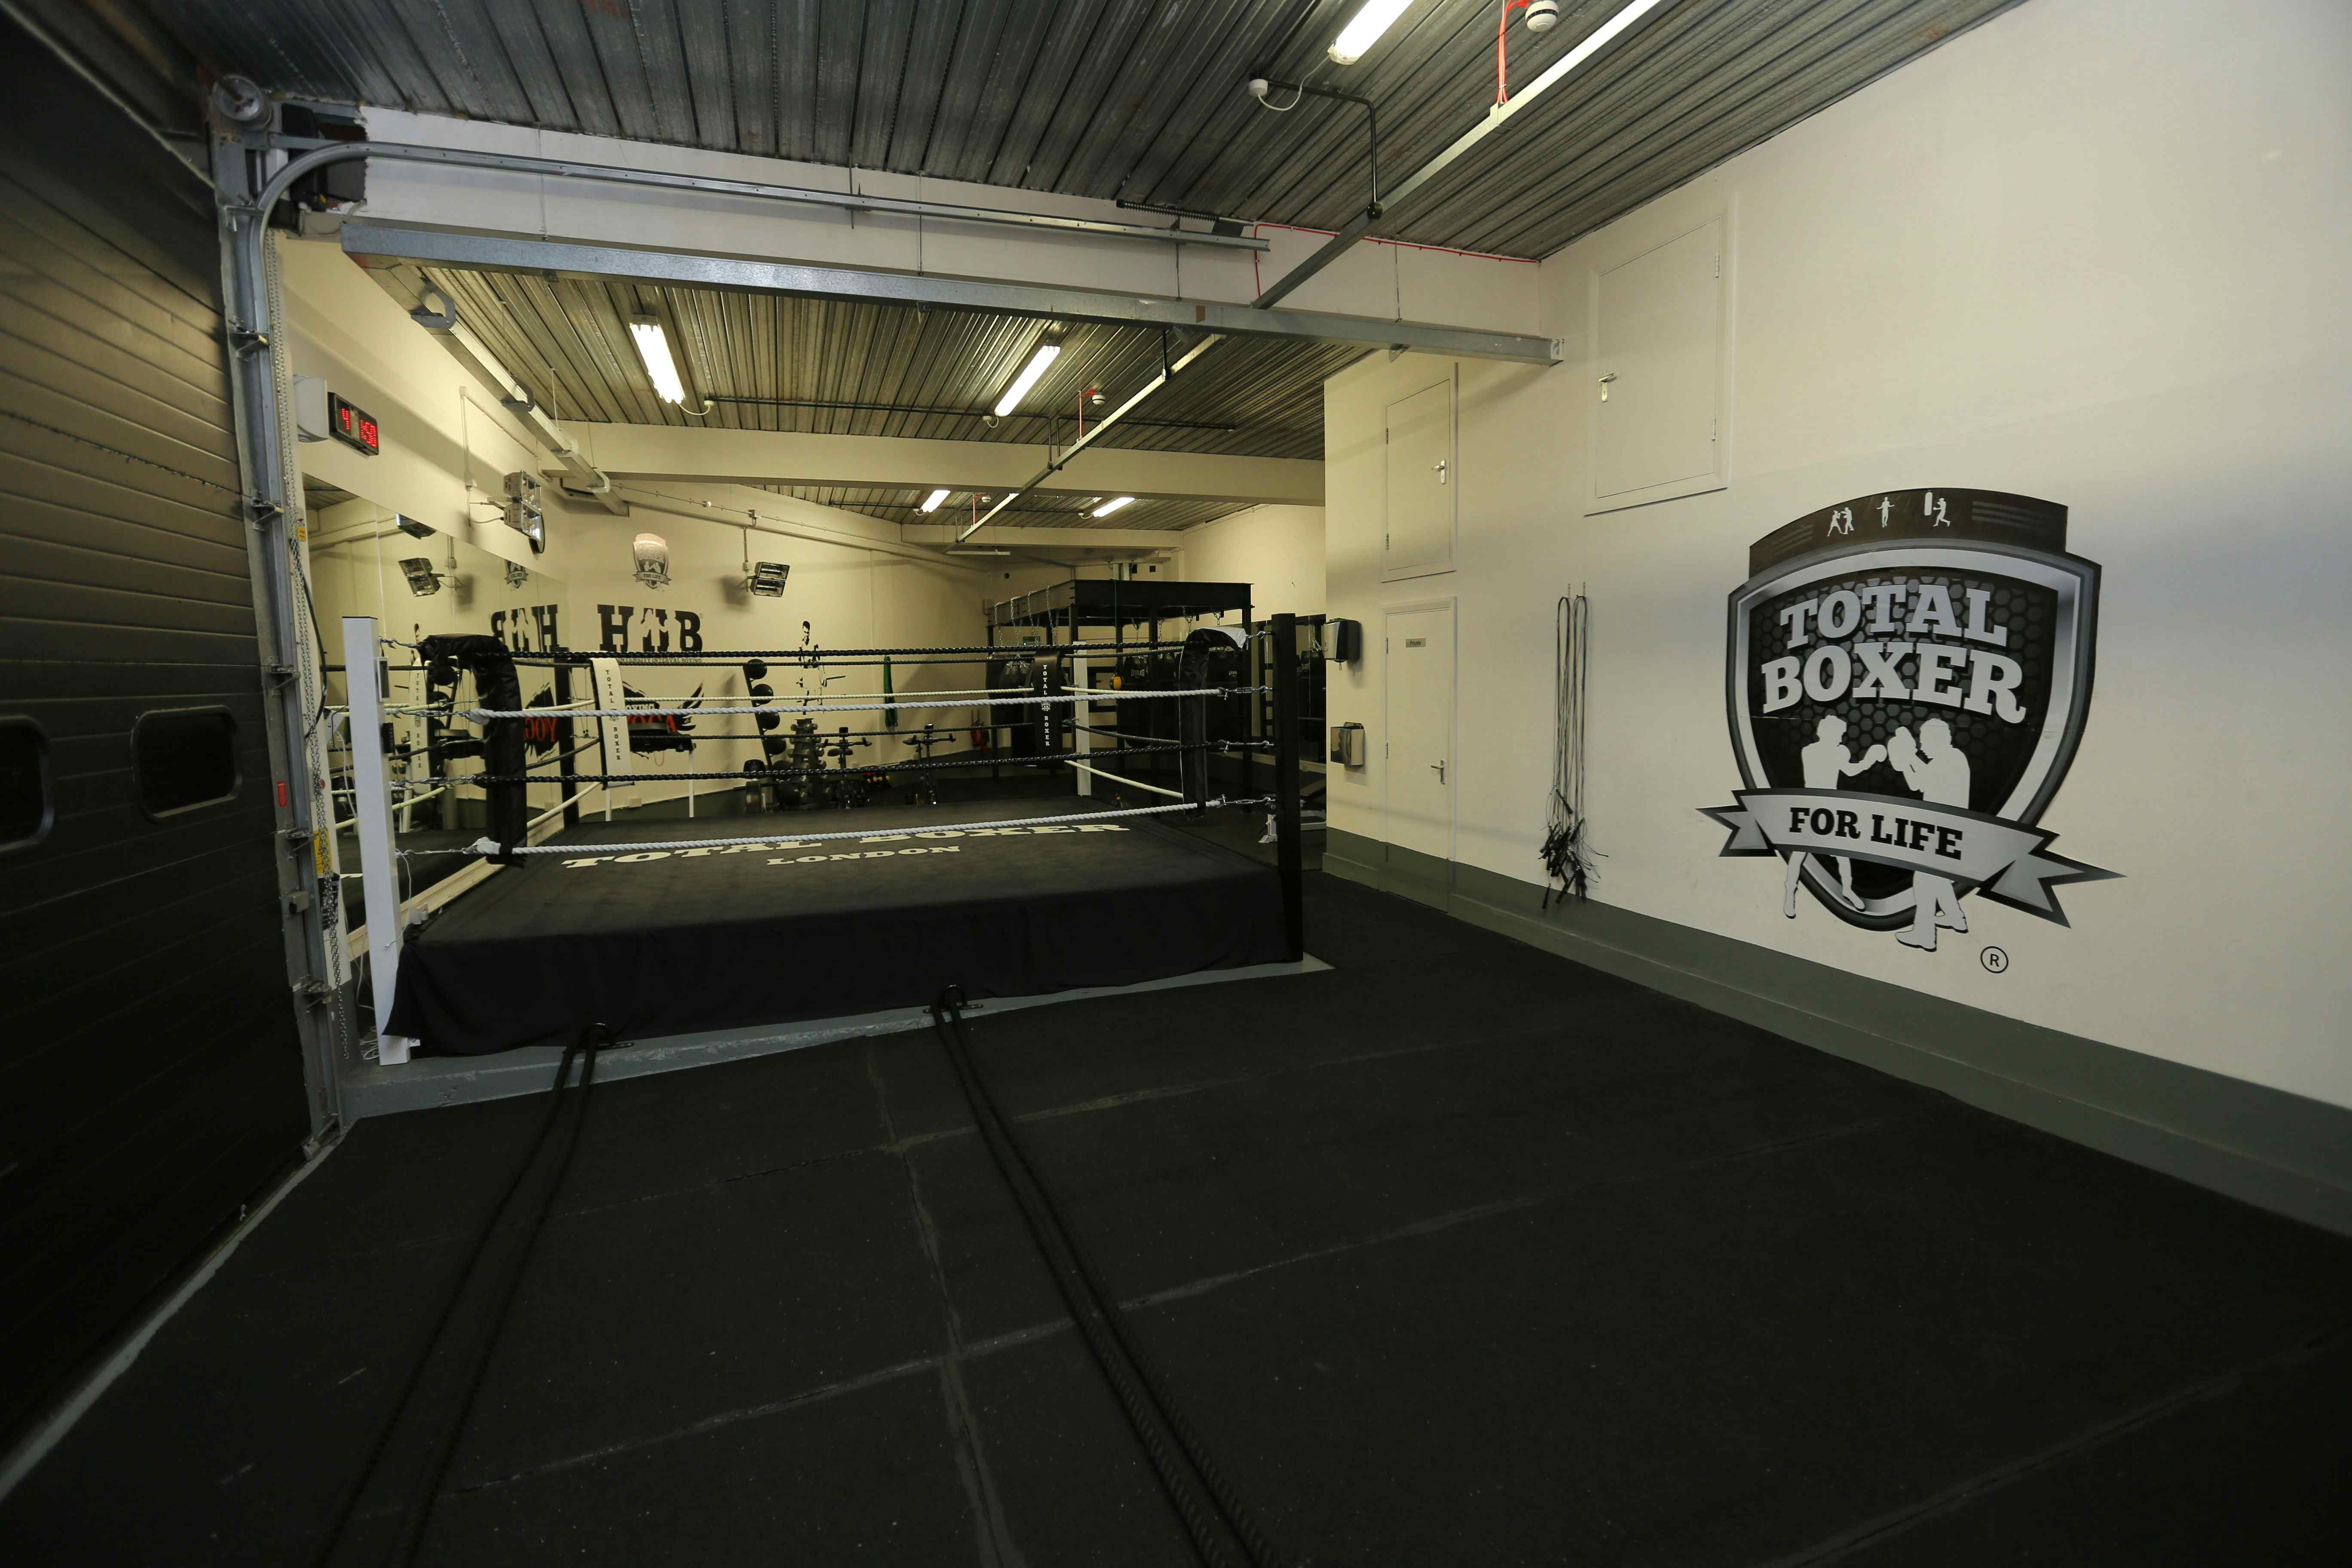 Boxing Gym and meeting rooms, Total Boxer